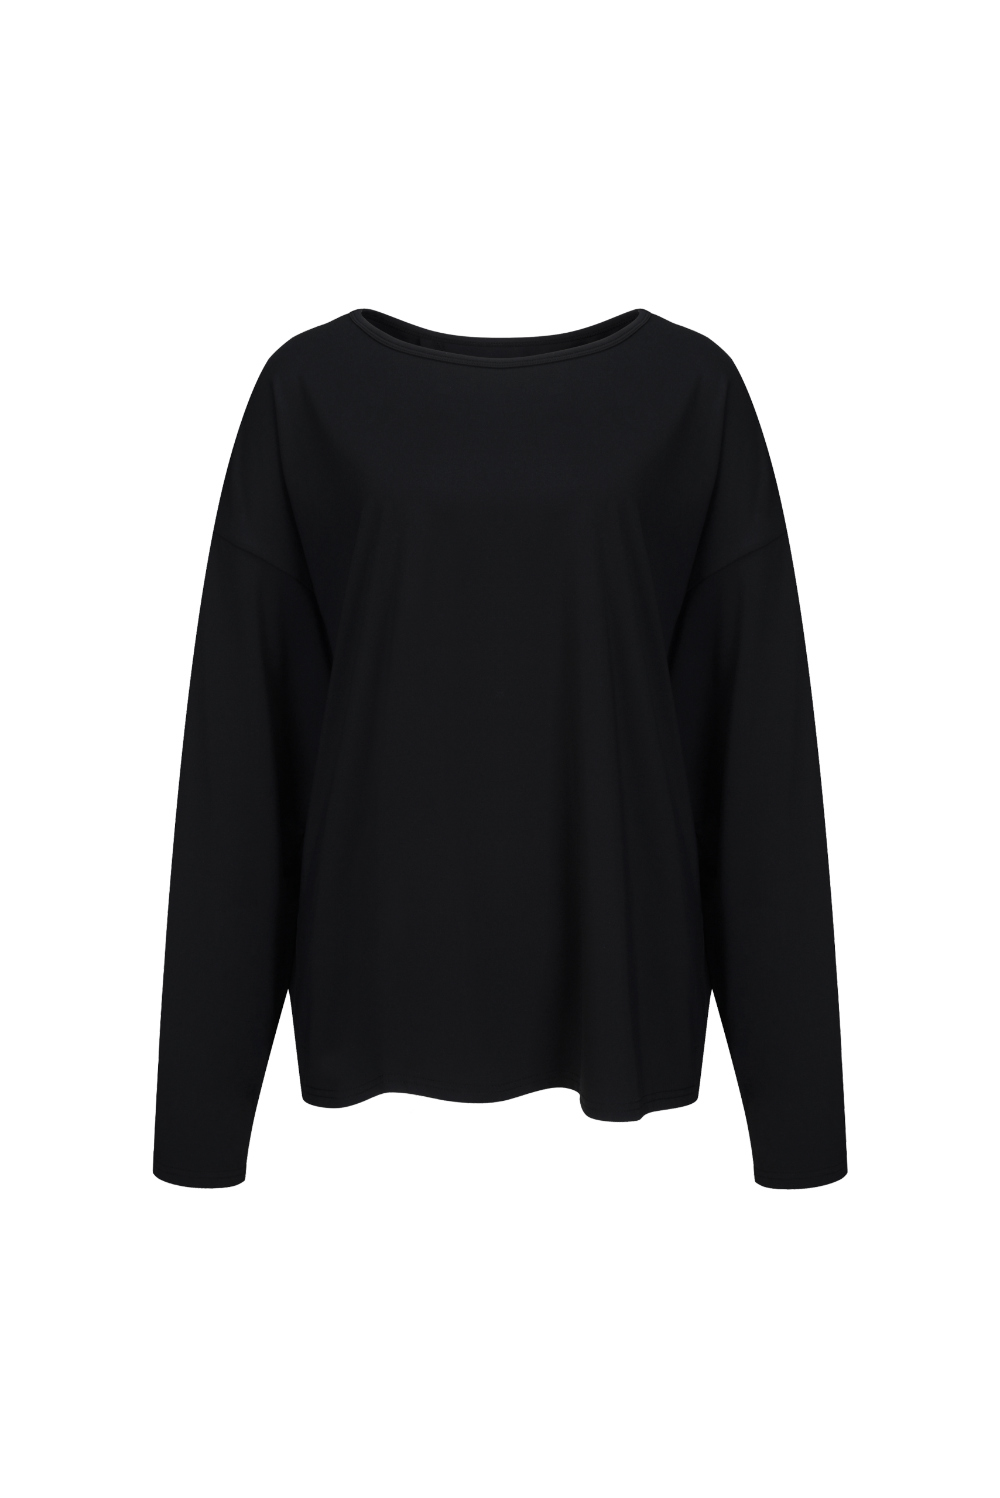 long sleeved tee charcoal color image-S2L1